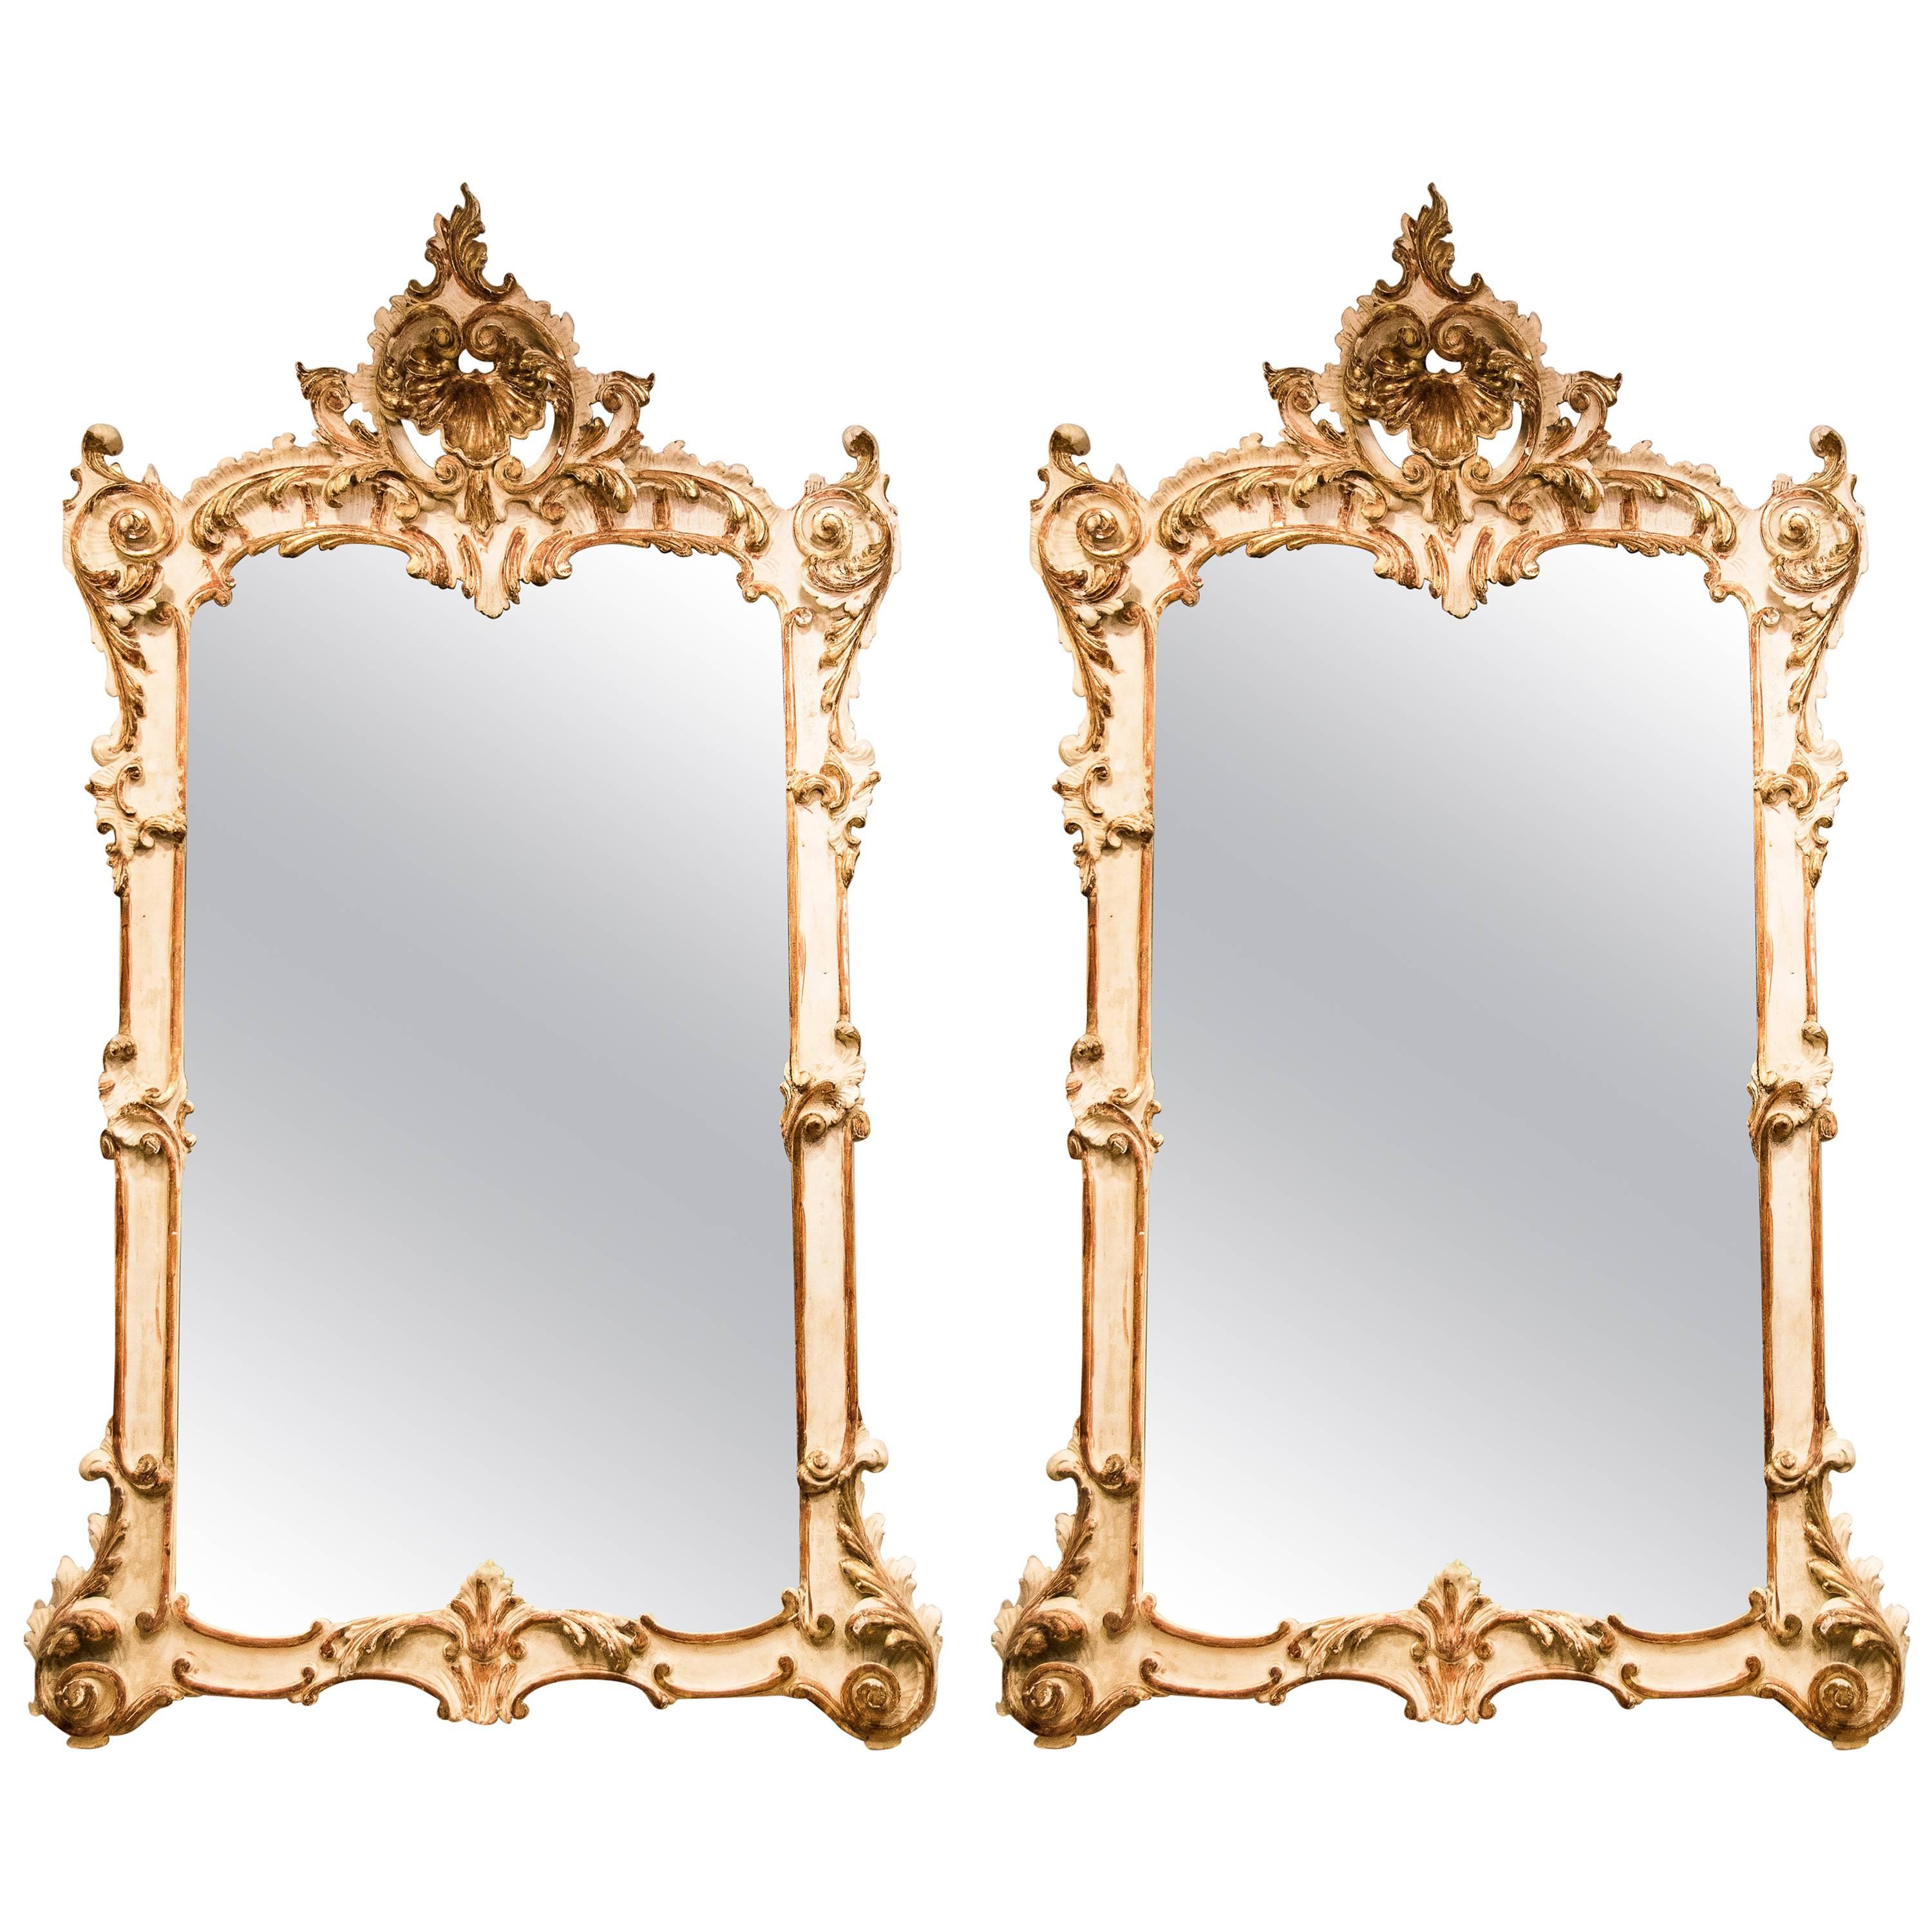 19th Century White and Gold Pair of Venetian Wall Mirrors